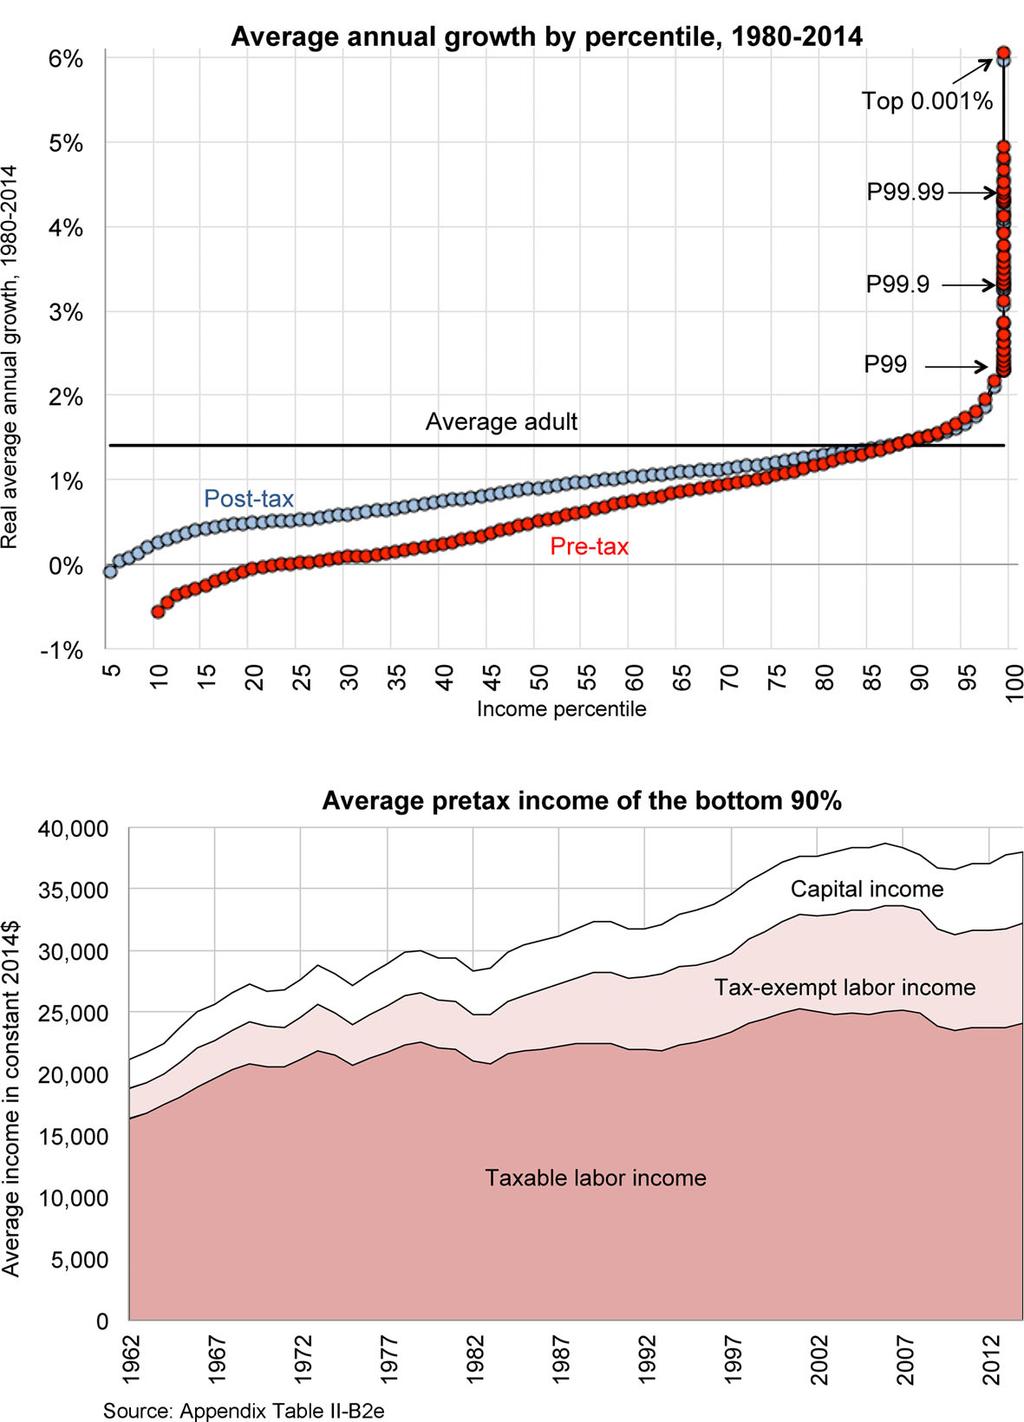 DISTRIBUTIONAL NATIONAL ACCOUNTS 579 FIGURE II The Distribution of Economic Growth in the United States The top panel displays the annualized growth rate of per-adult national income (pretax and